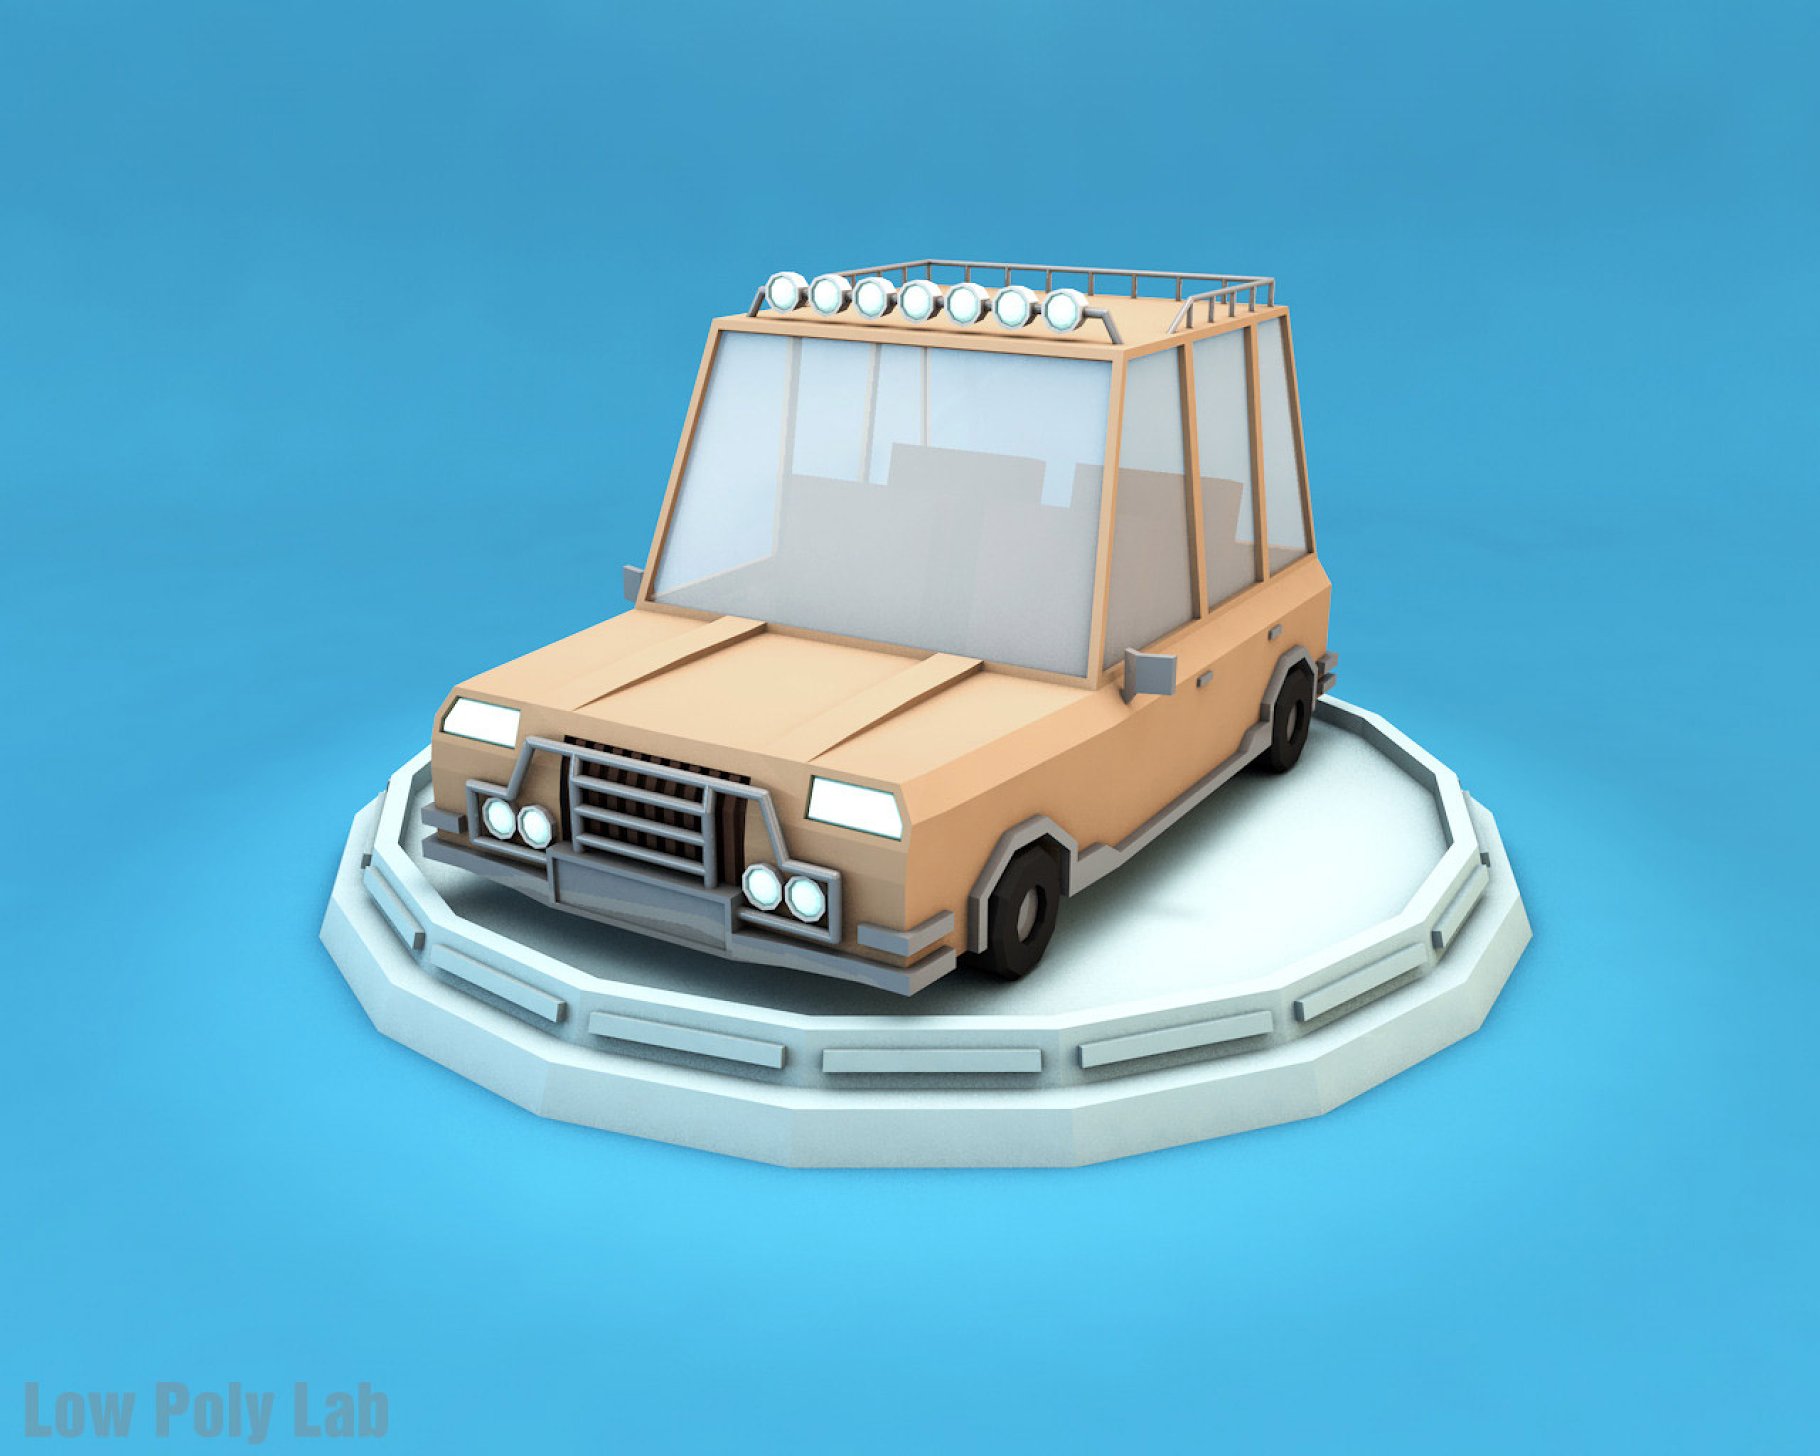 Beige front mockup of low poly car jeep on a blue background.